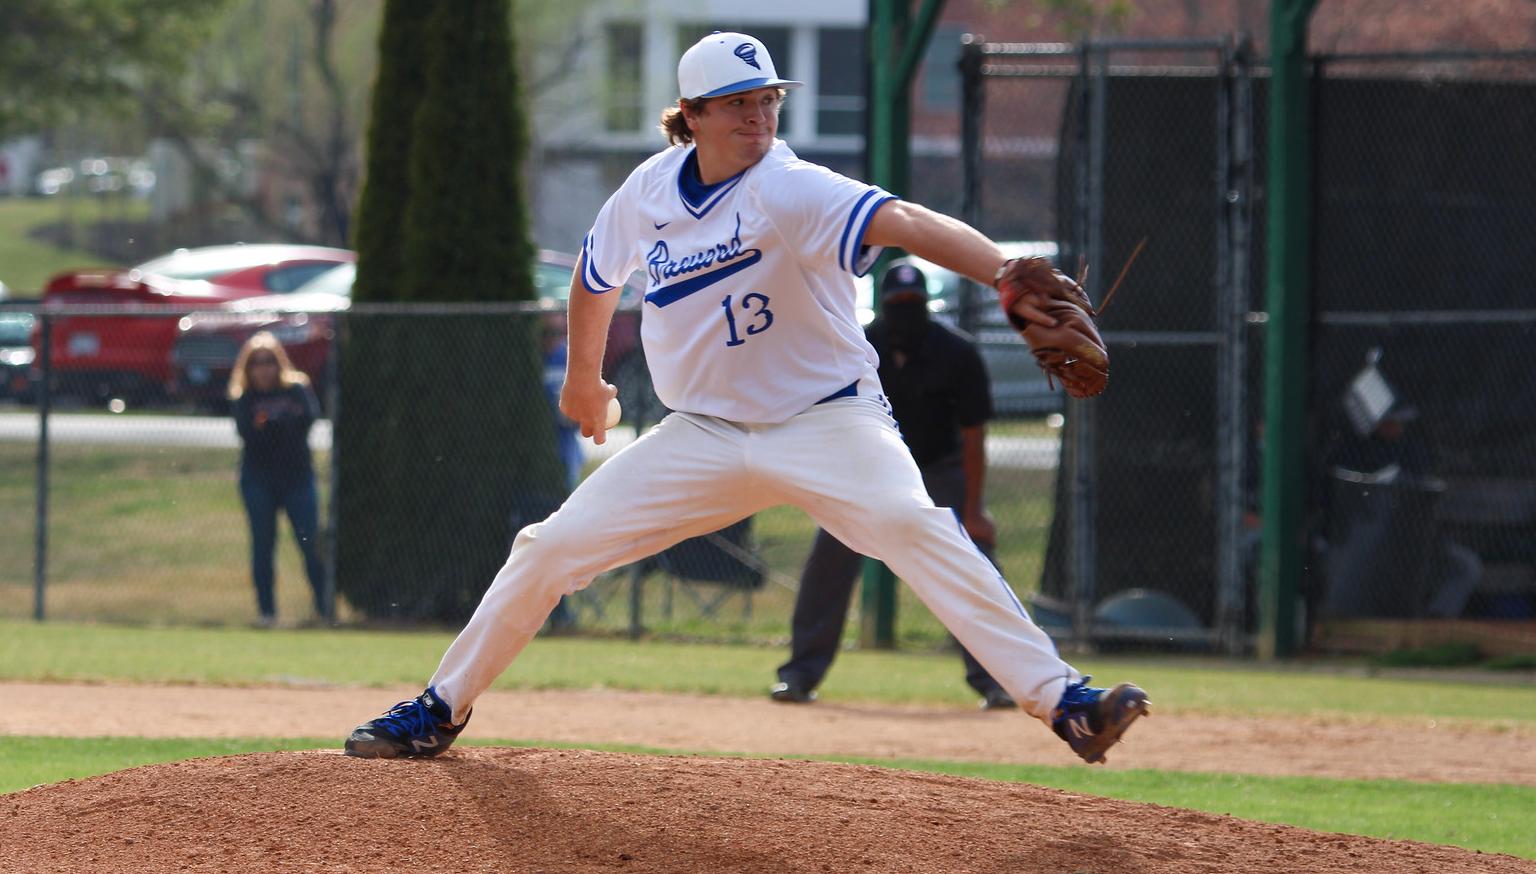 Sophomore right-handed pitcher Nathan Sanders tossed a career performance vs. Piedmont that included a career-high 11 strikeouts (Photo courtesy of Brianna Rodibaugh '24).